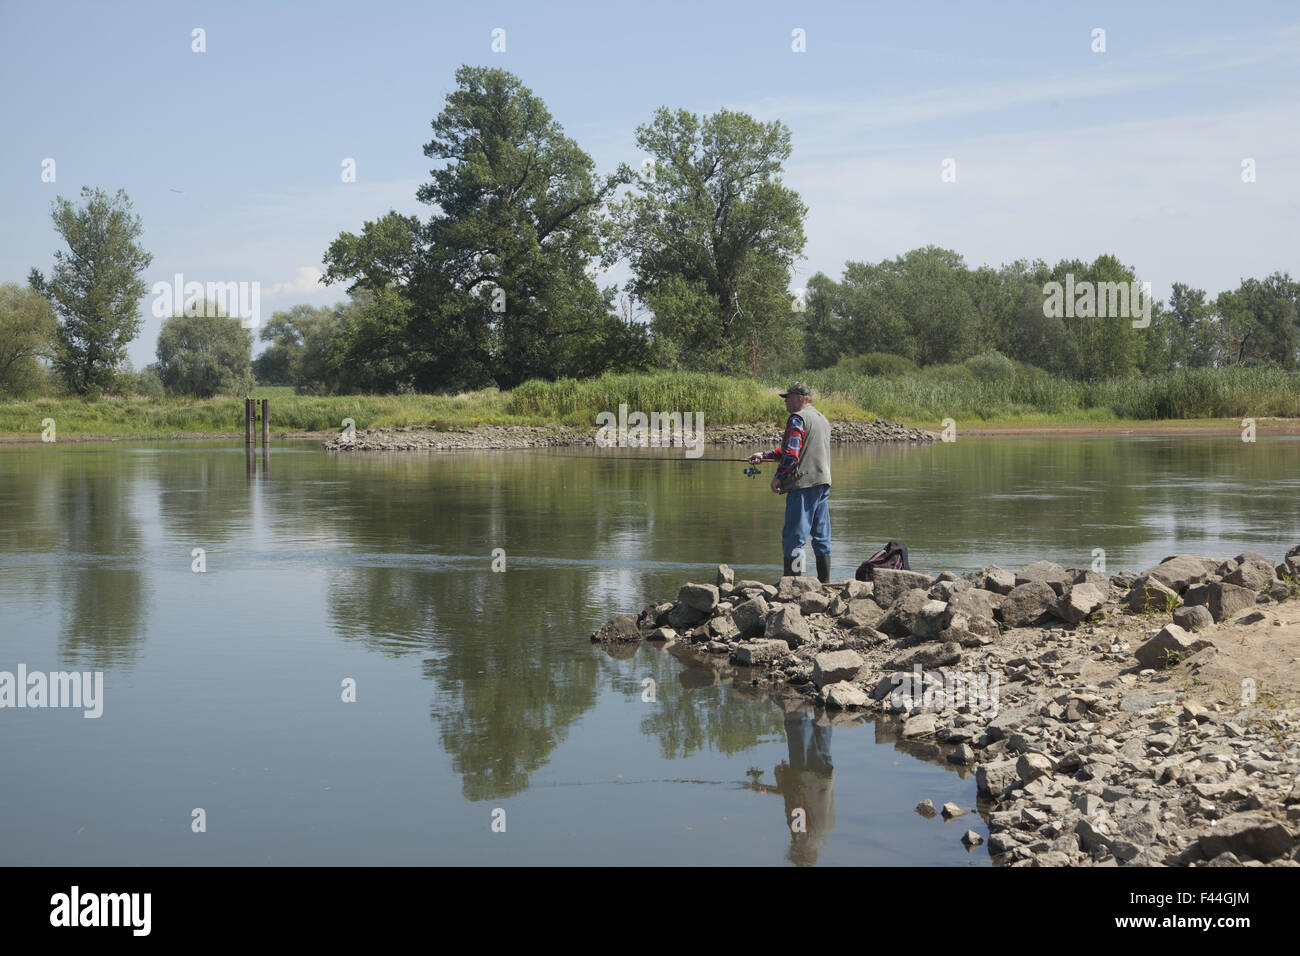 Man fishing on the River Odor the 2nd longest river in Poland. Stock Photo